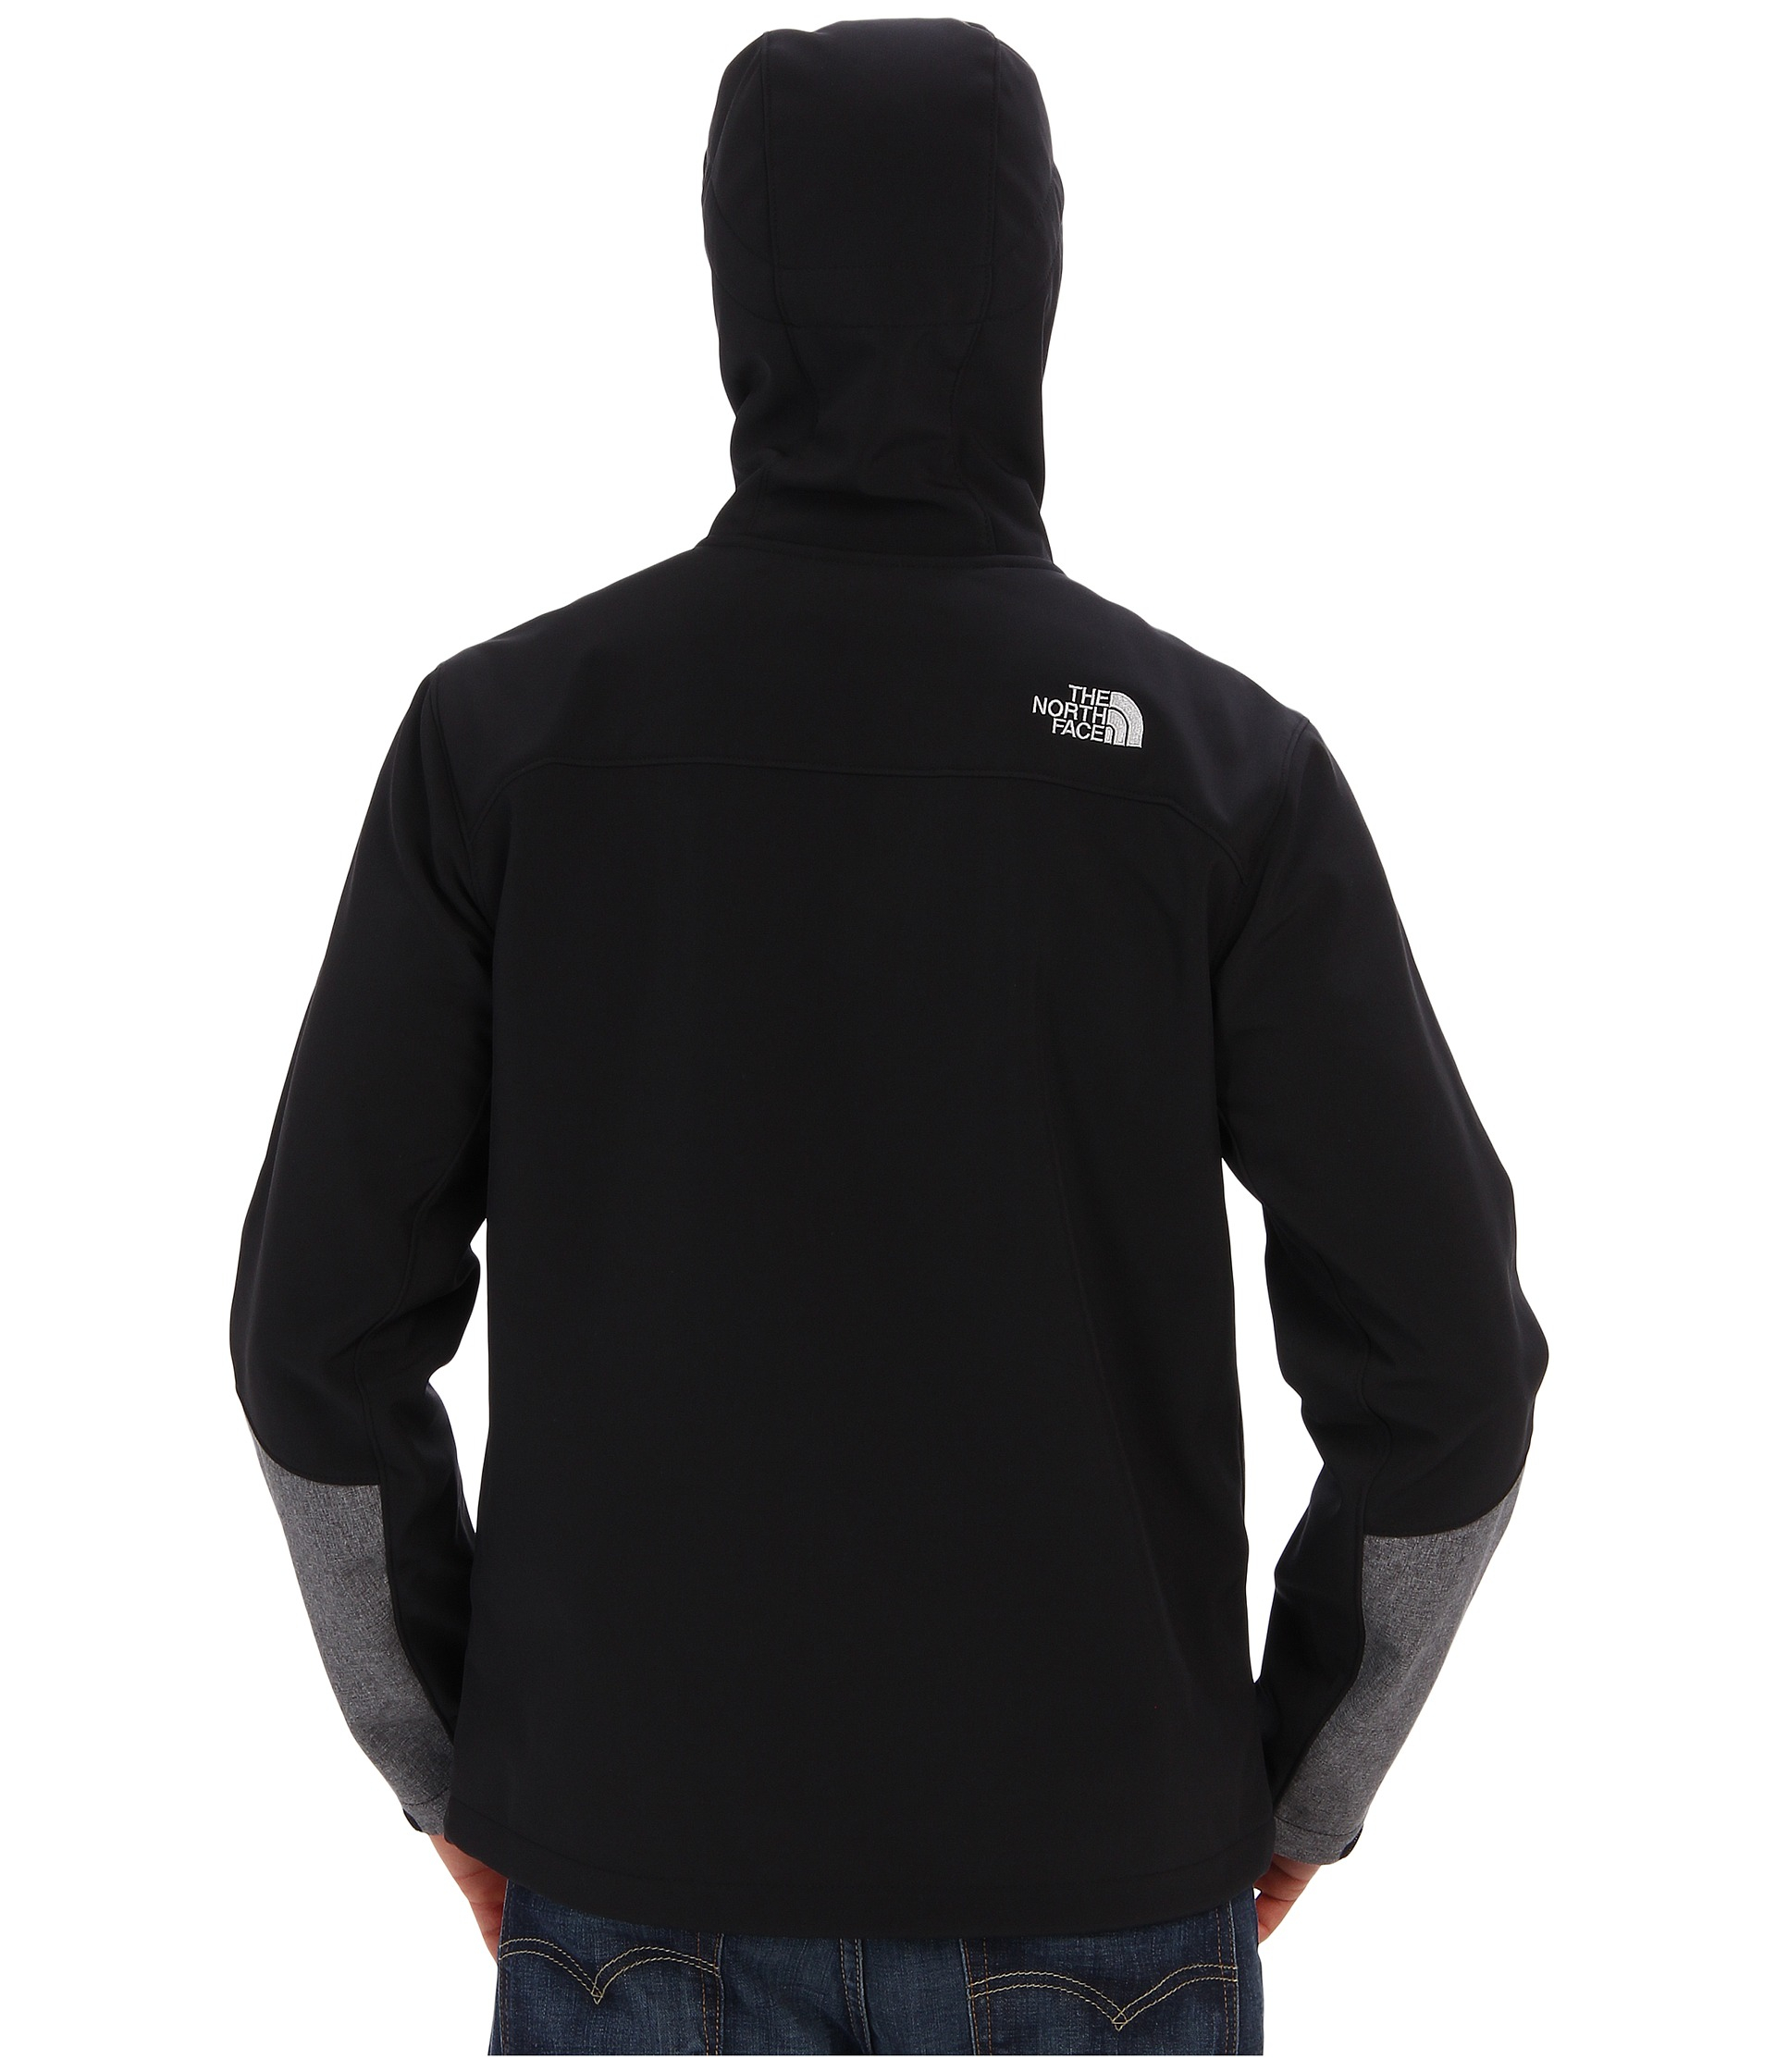 Lyst - The North Face Apex Bionic Hoodie in Black for Men